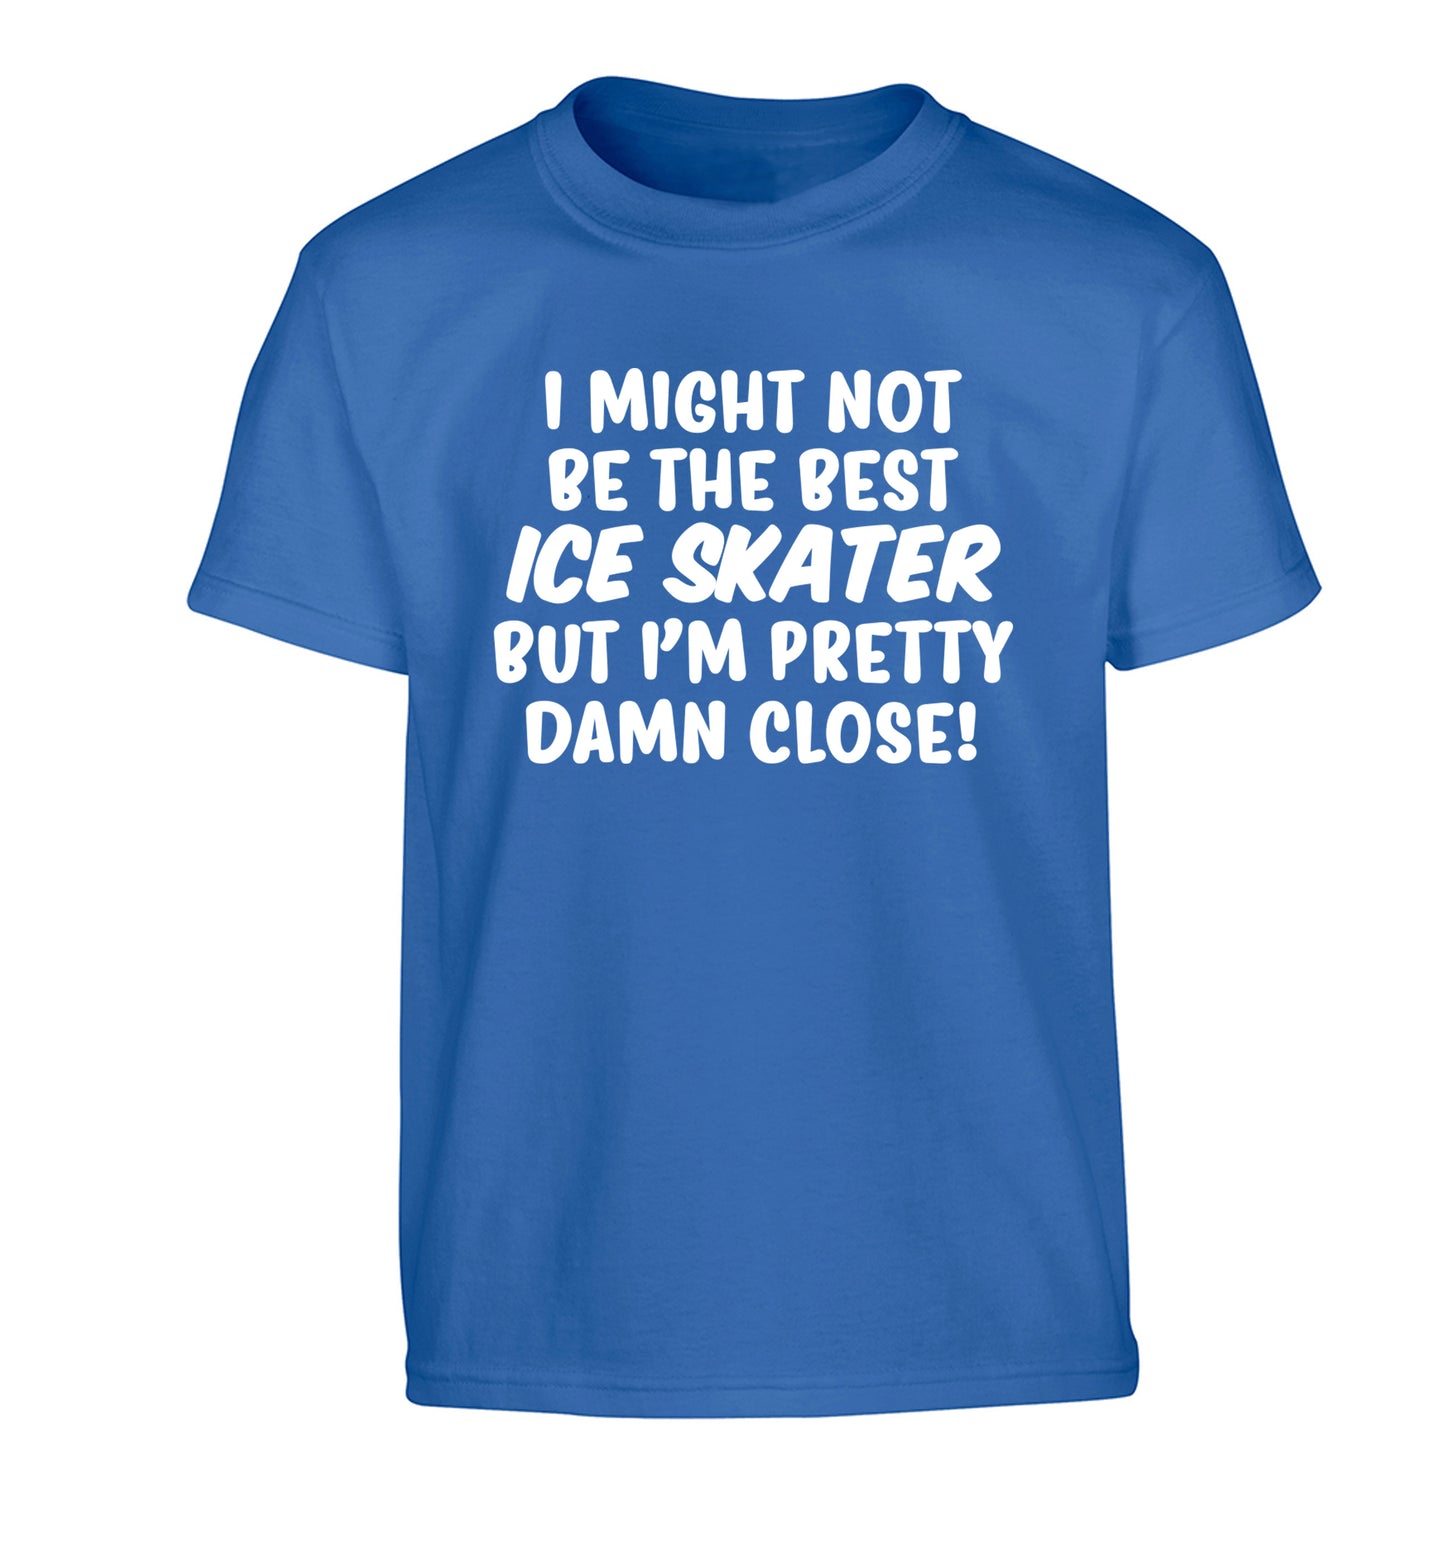 I might not be the best ice skater but I'm pretty damn close! Children's blue Tshirt 12-14 Years